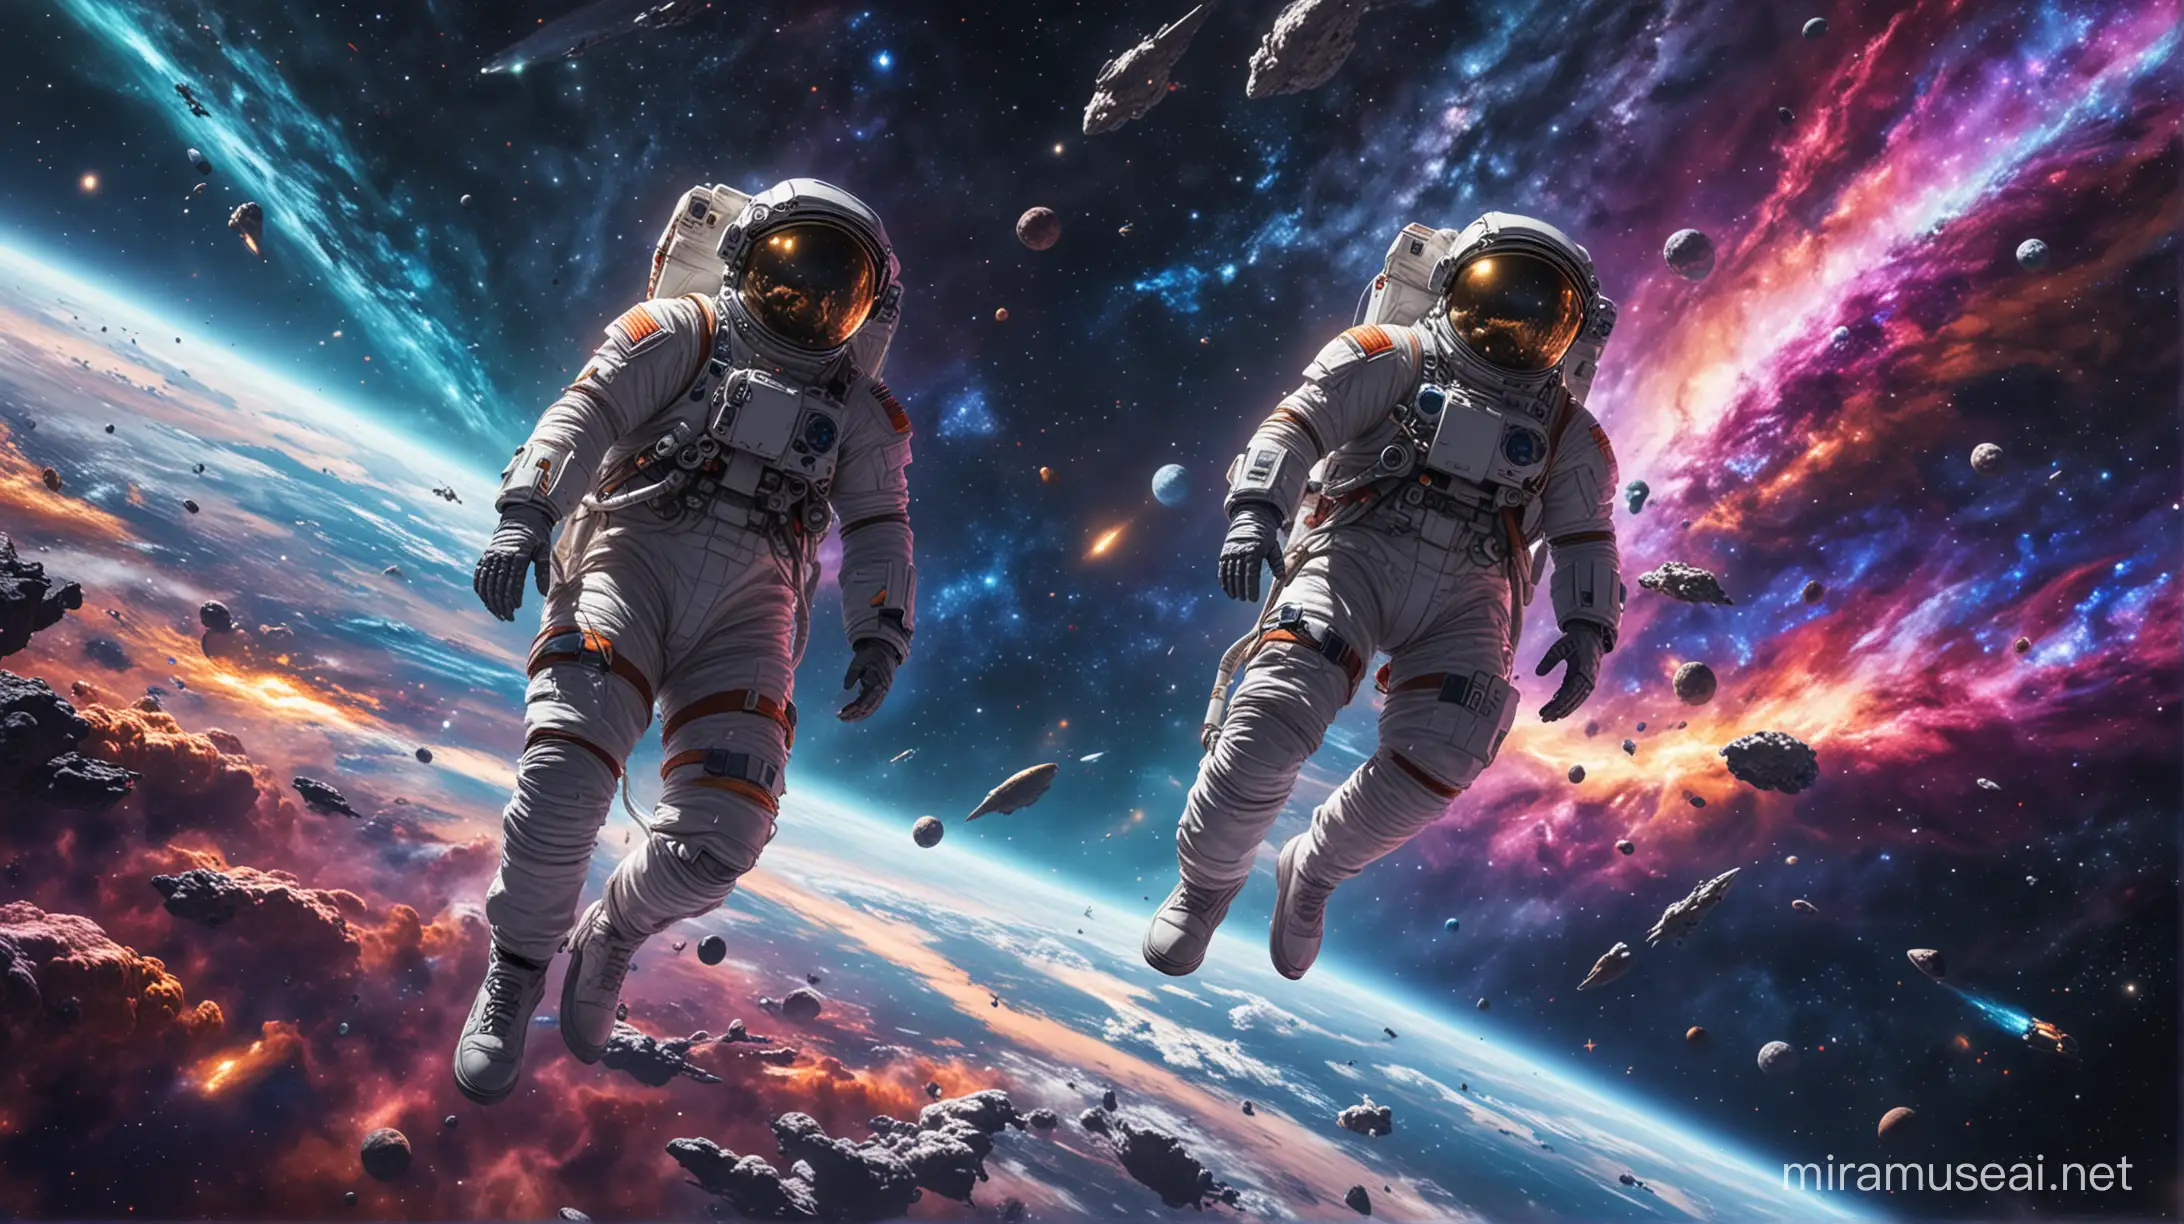 Hyperrealistic Anime Style Astronauts Floating in Colorful Space Vortex